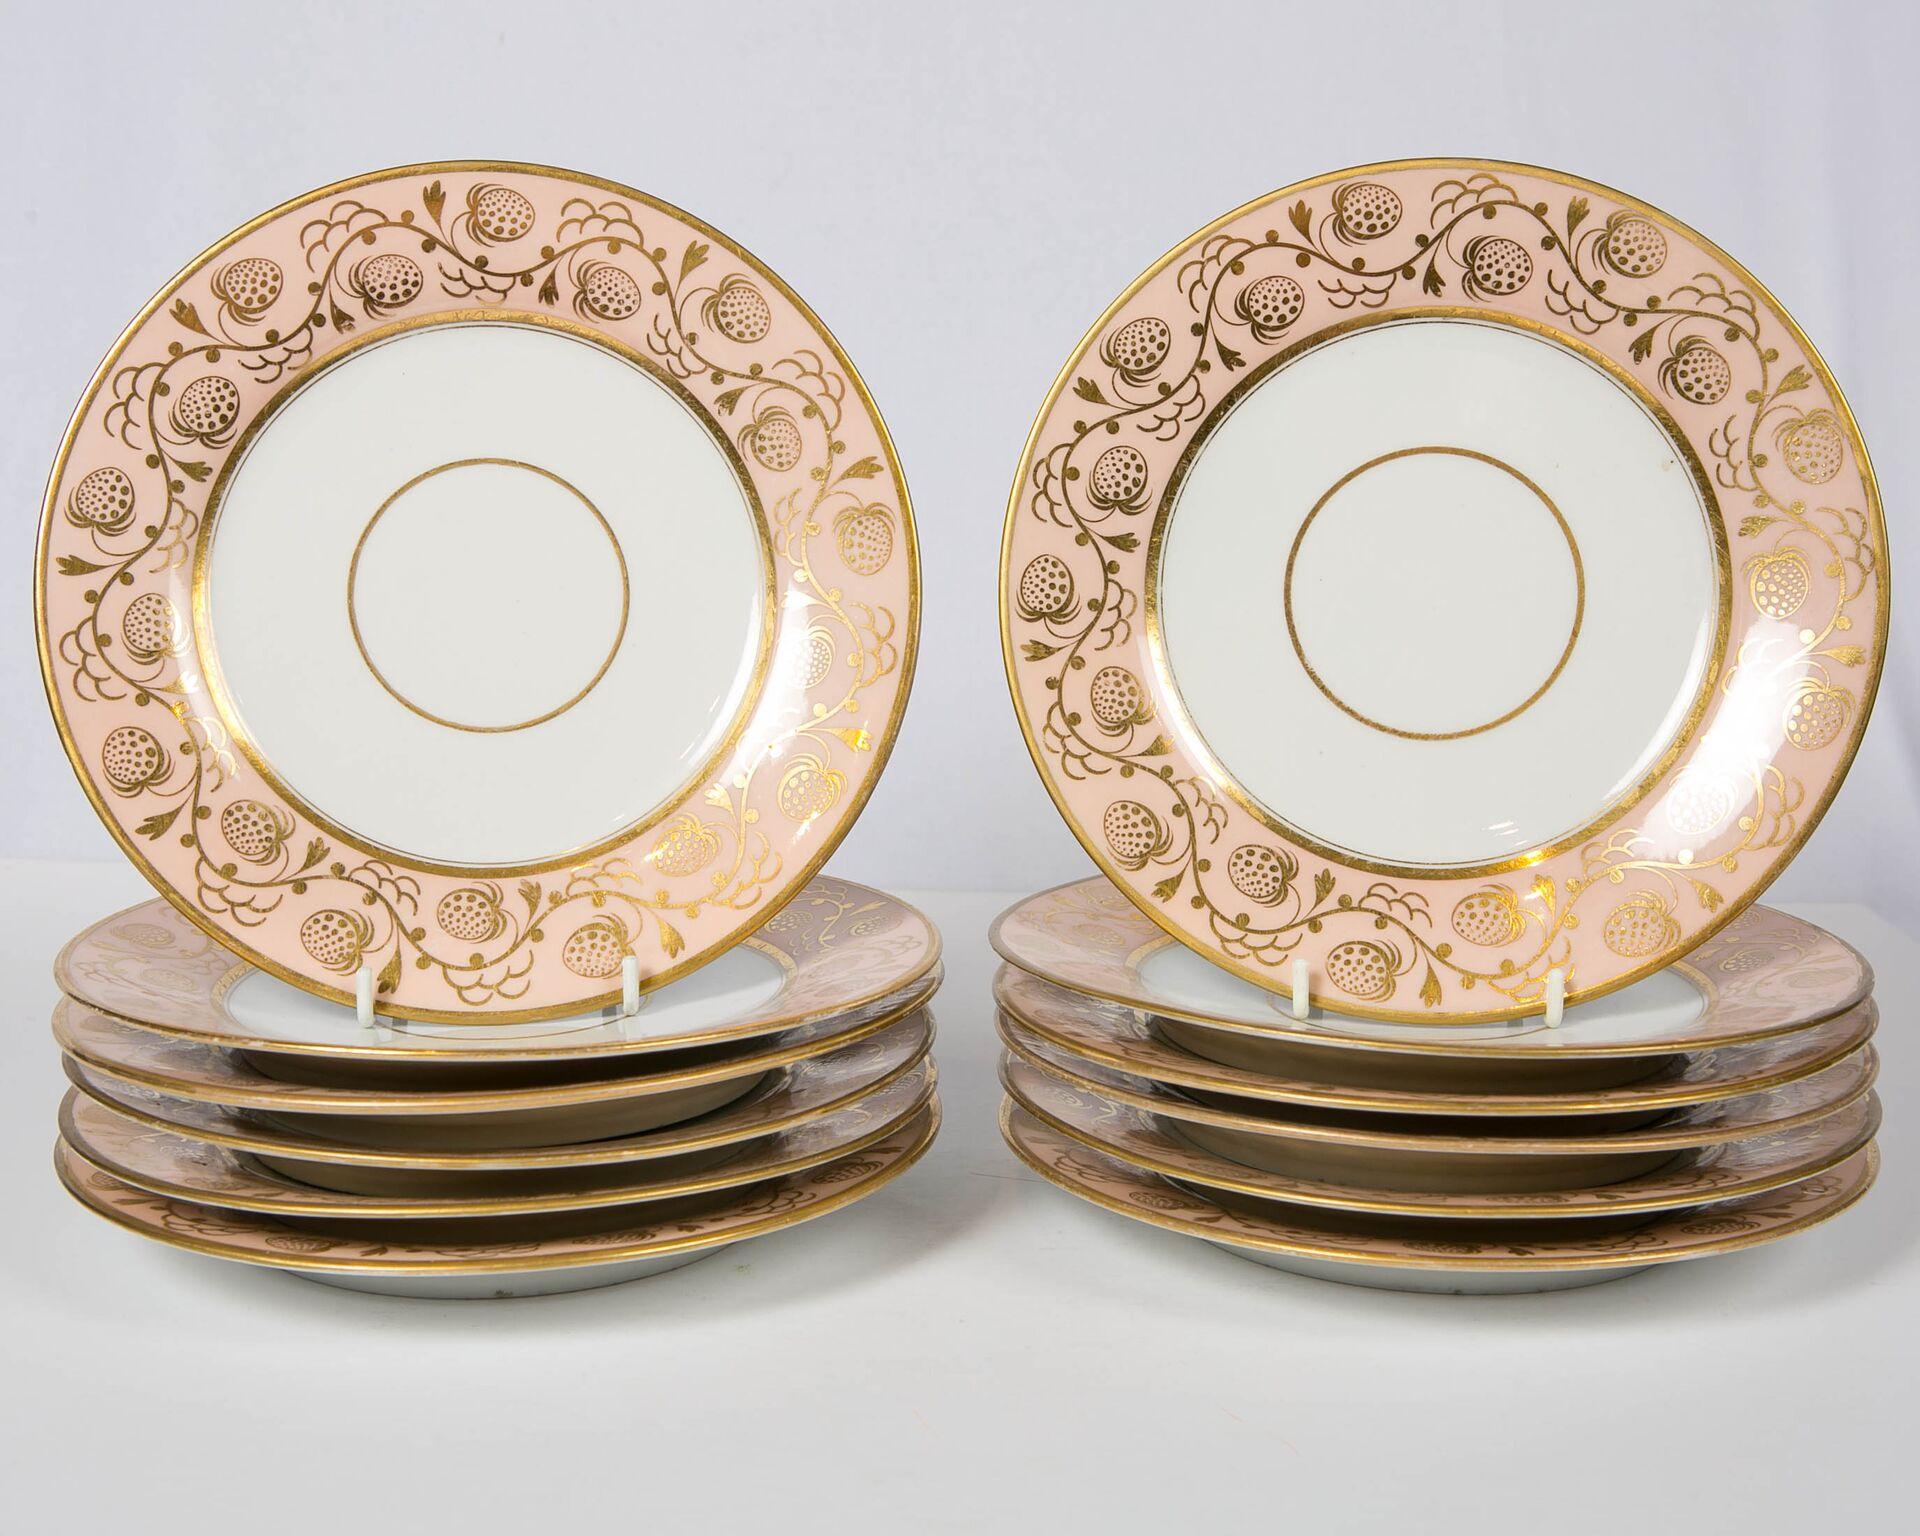  This set of antique Flight Barr Barr Worcester dessert dishes are marked with an impressed crown over 